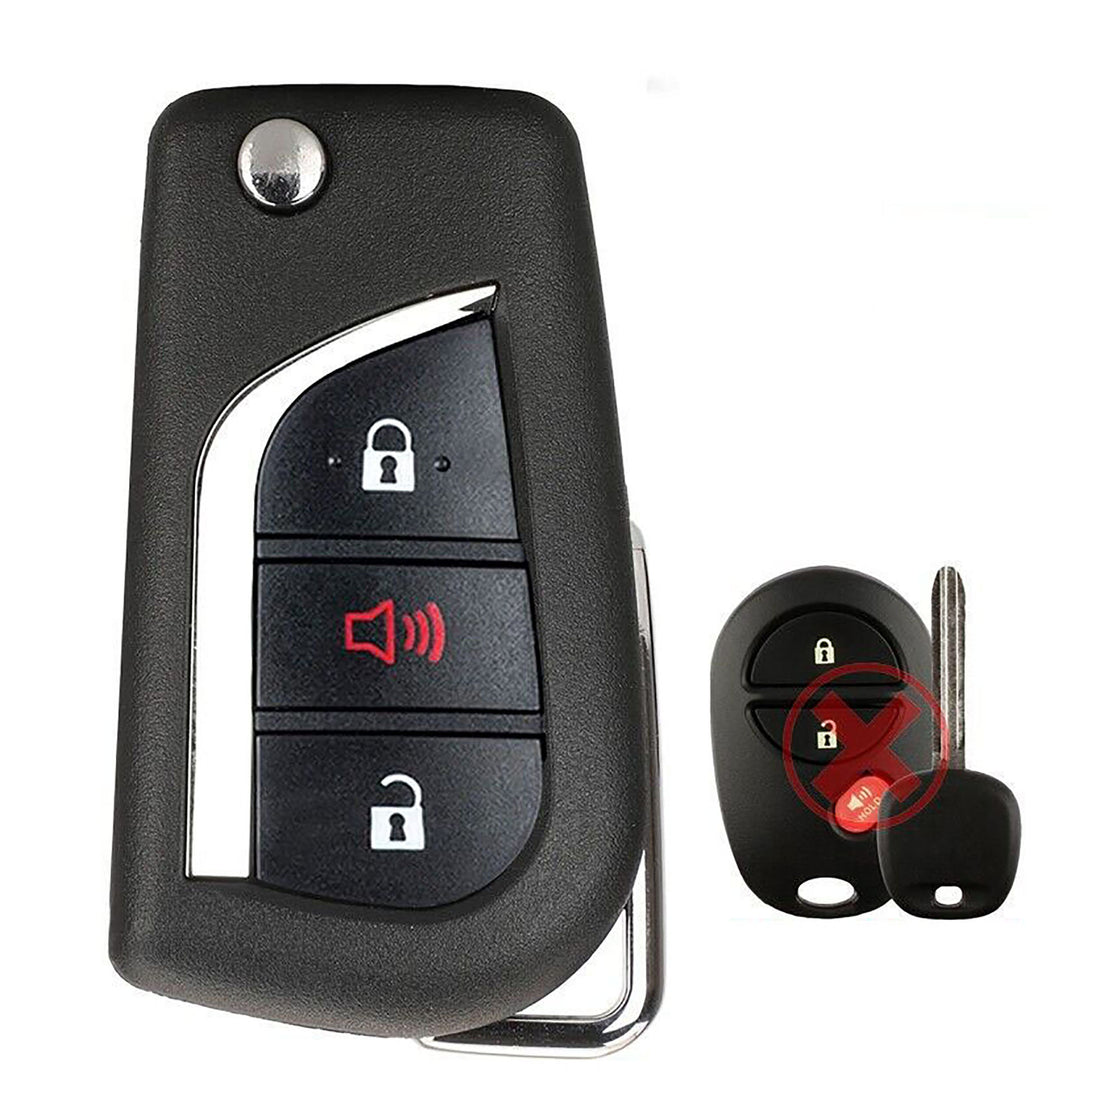 1x New Replacement Transponder Key Remote Compatible with & Fit For Toyota Dot chip - MPN TOY44D-PT-C-10